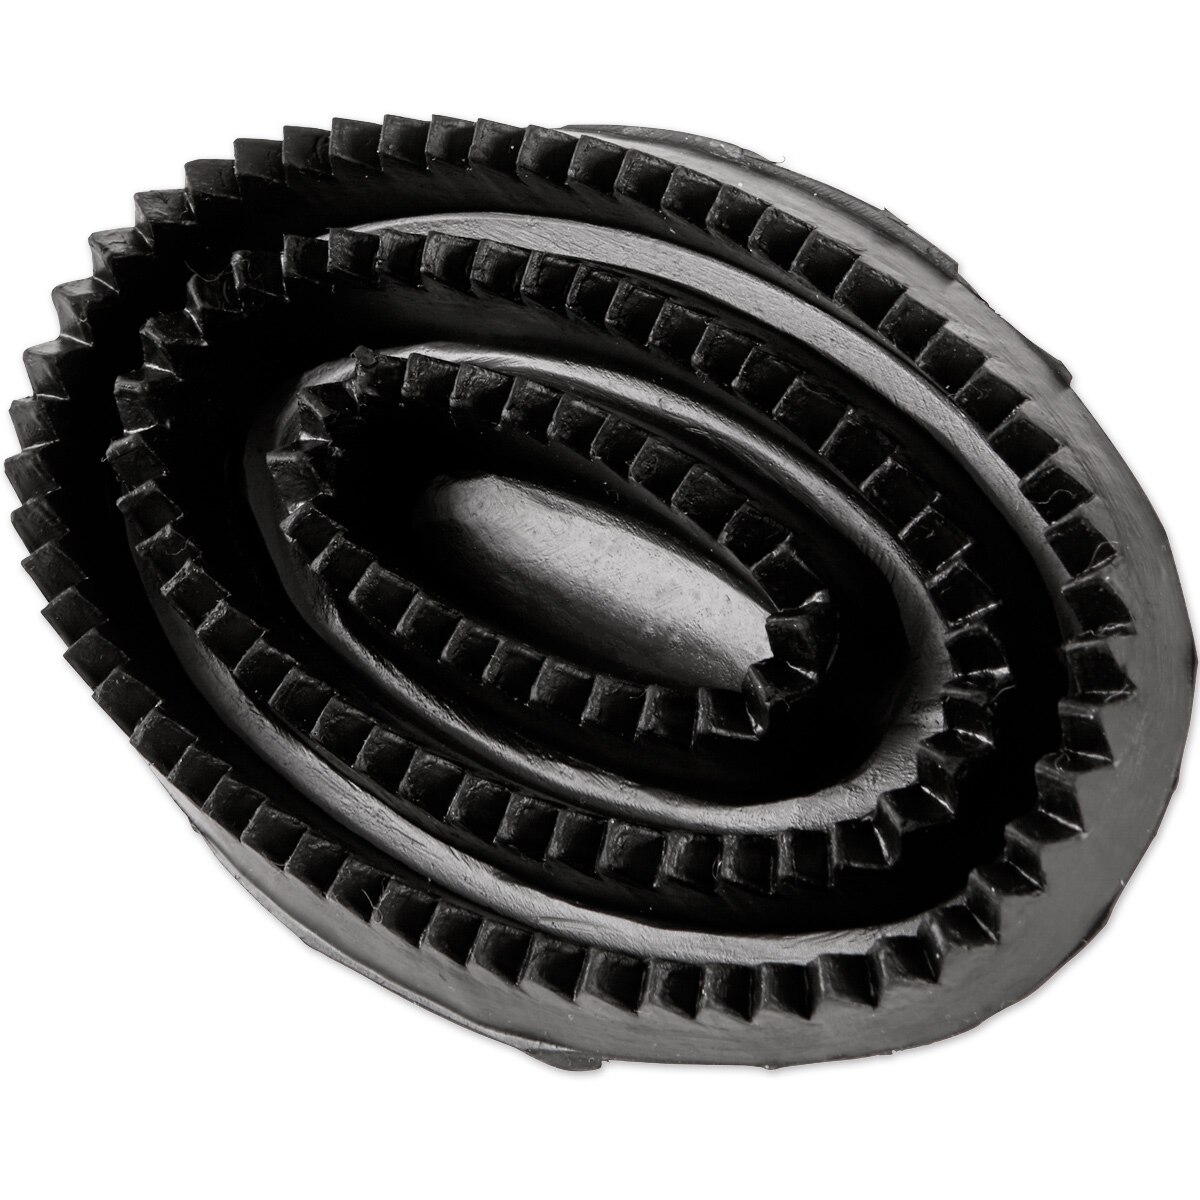 Details about  / Shires Rubber Curry Comb